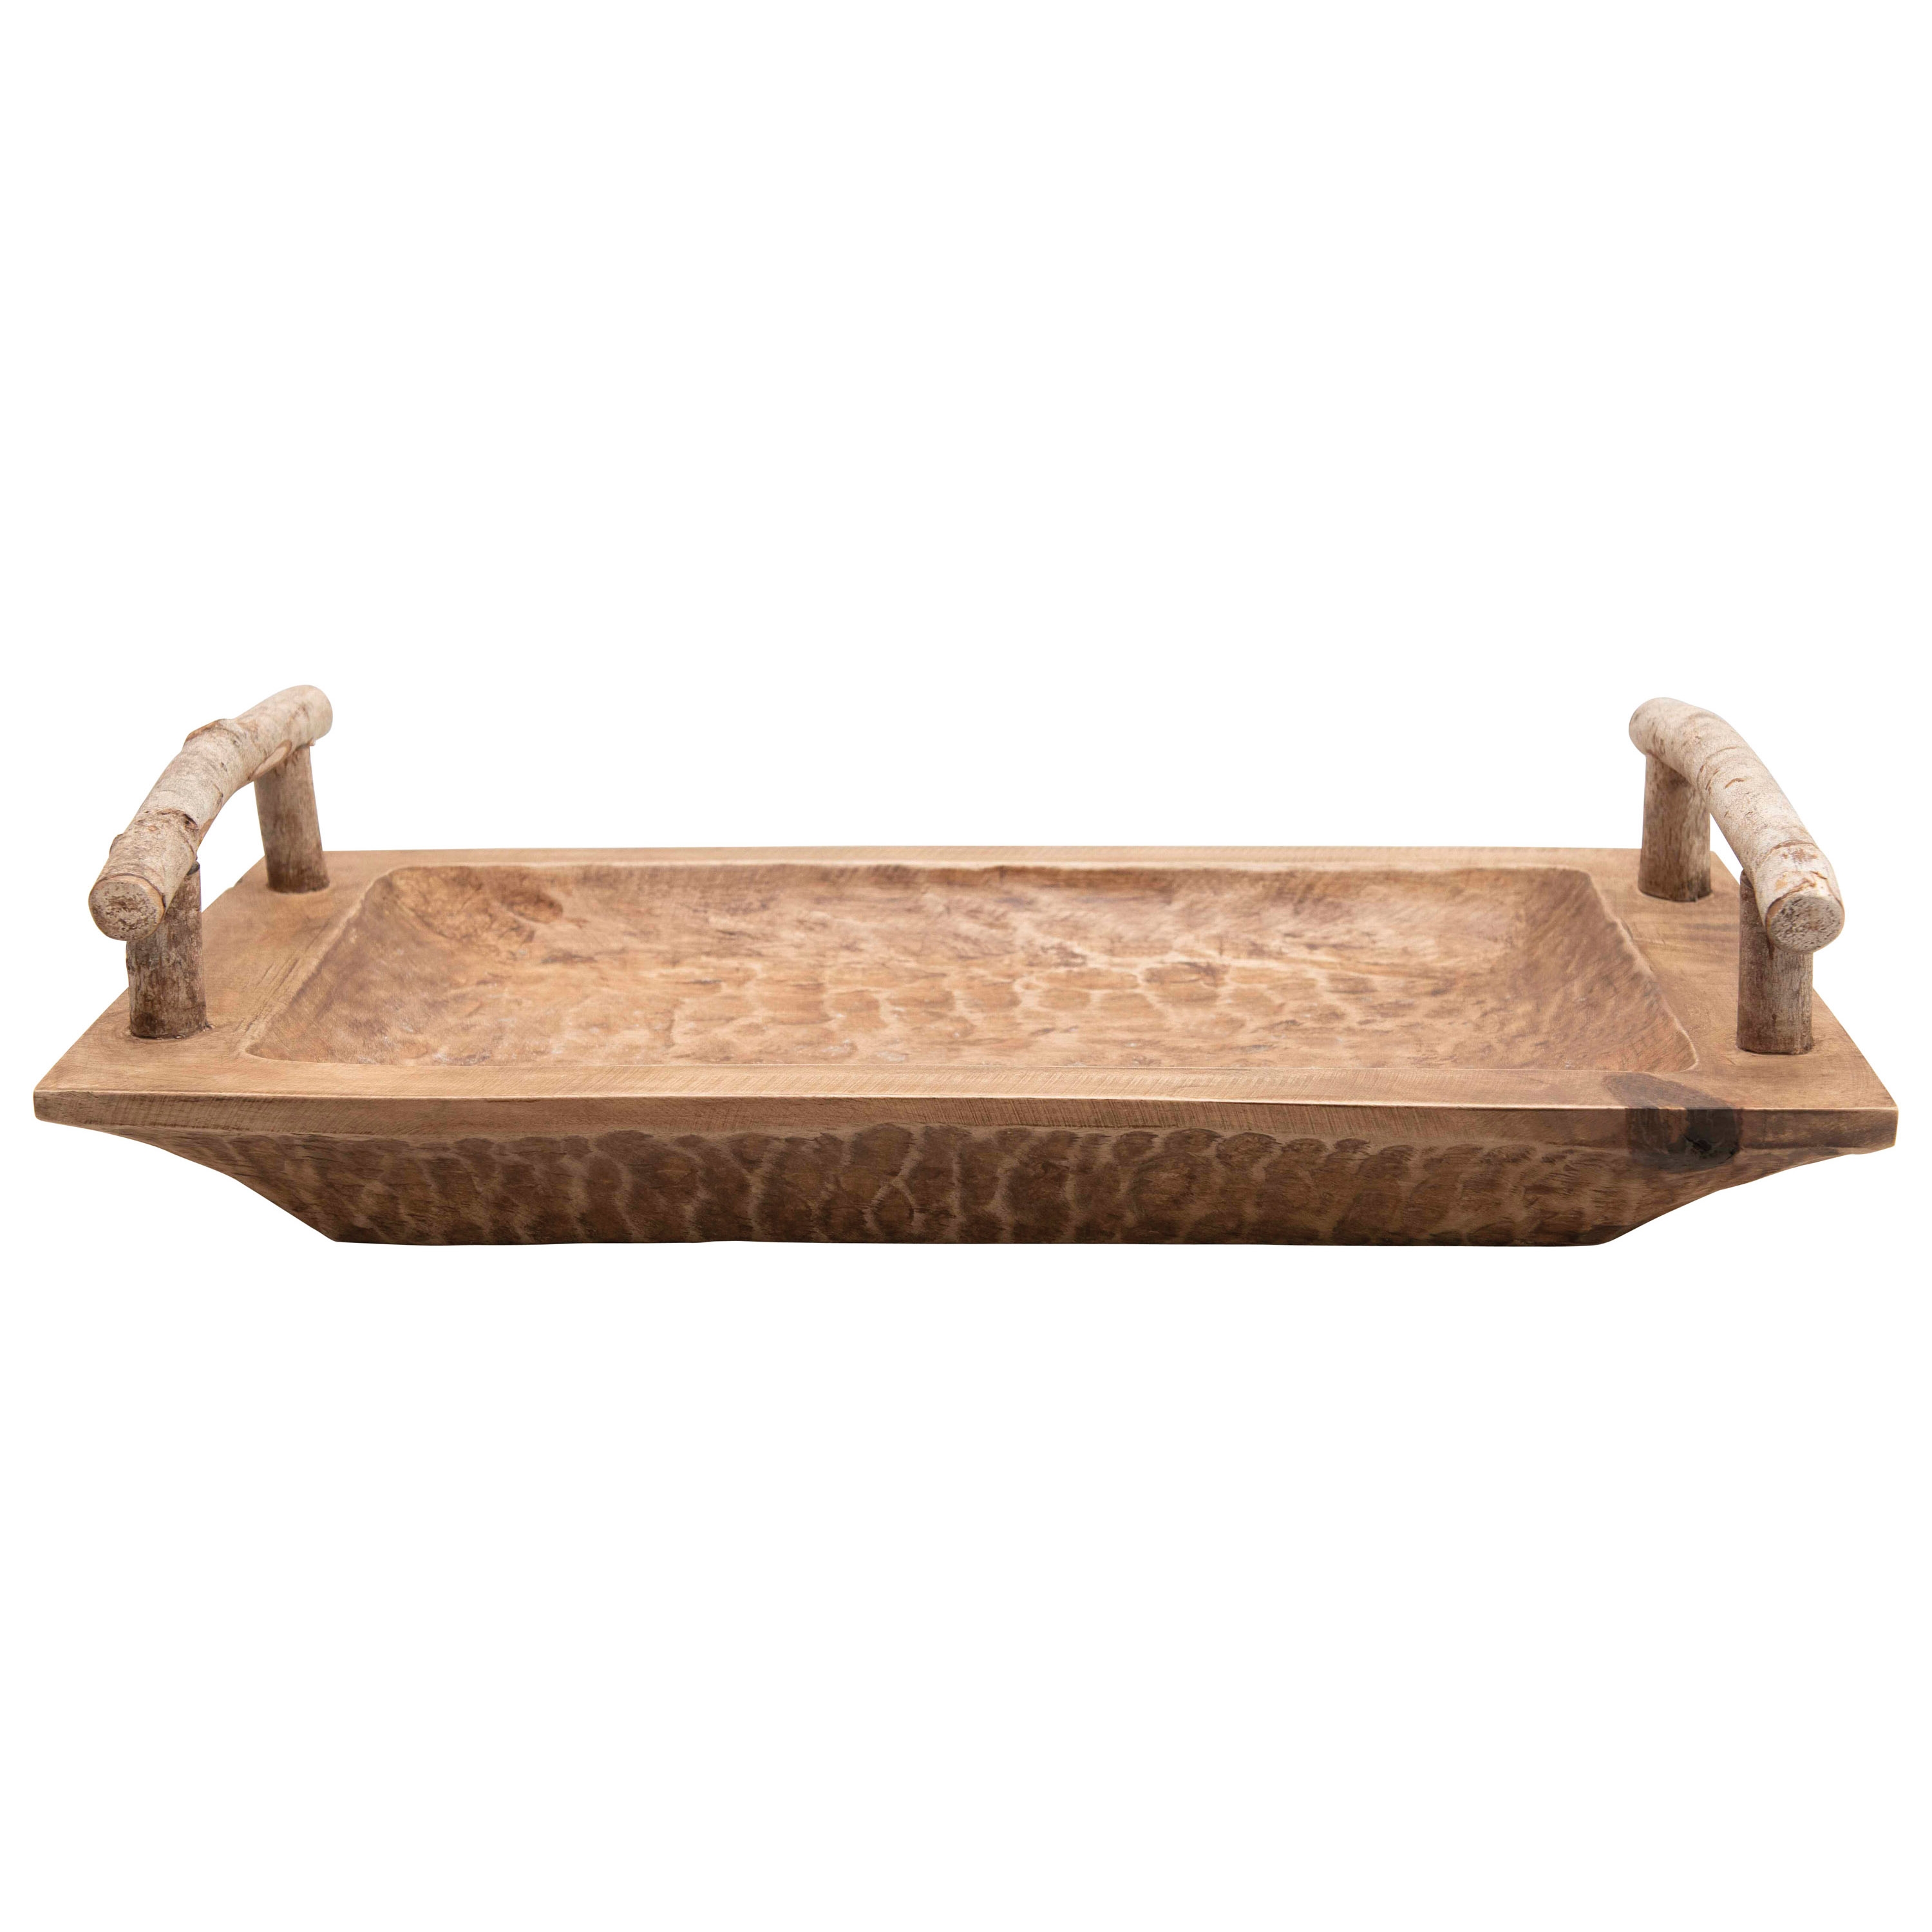 Hand-Carved Mango Wood Tray with Birch Branch Handles - Image 0